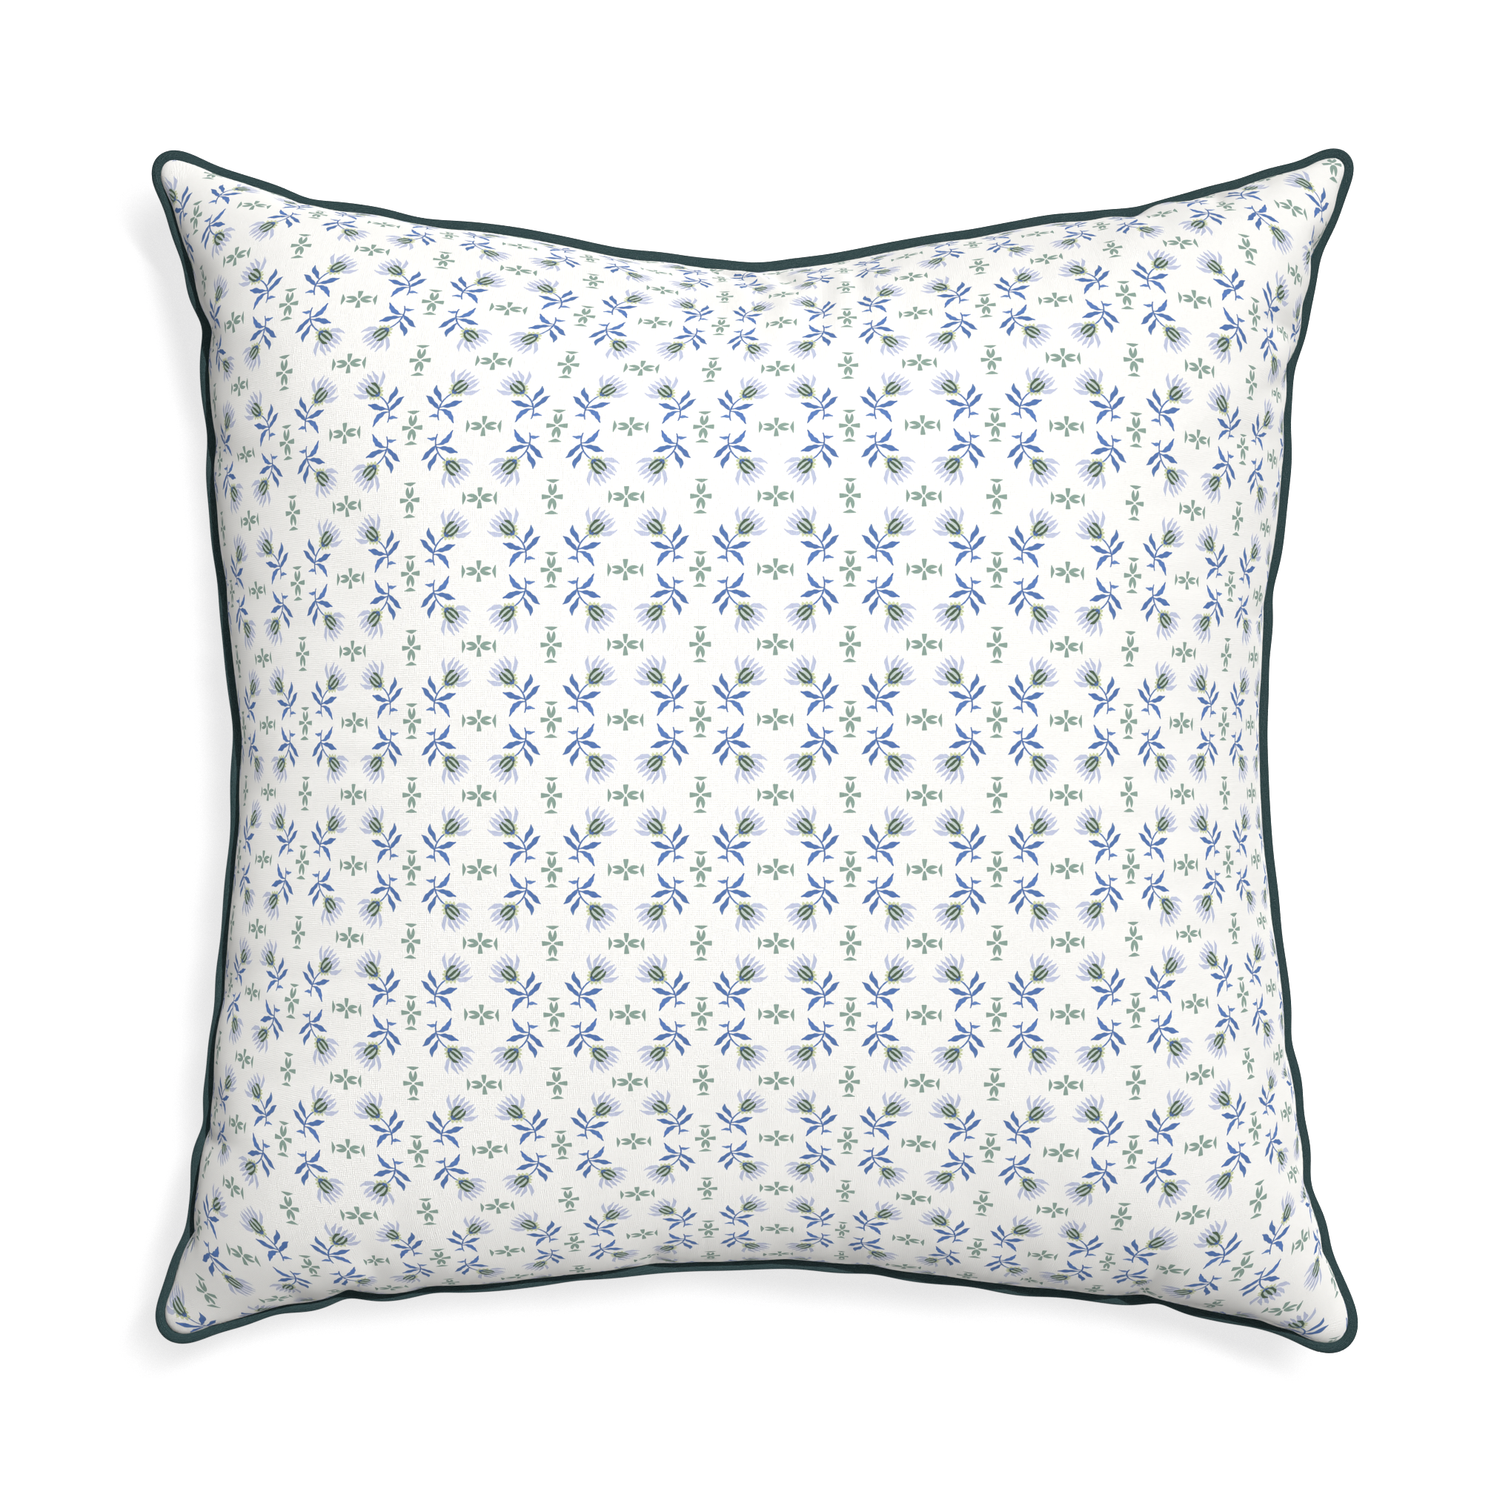 Euro-sham lee custom blue & green floralpillow with p piping on white background